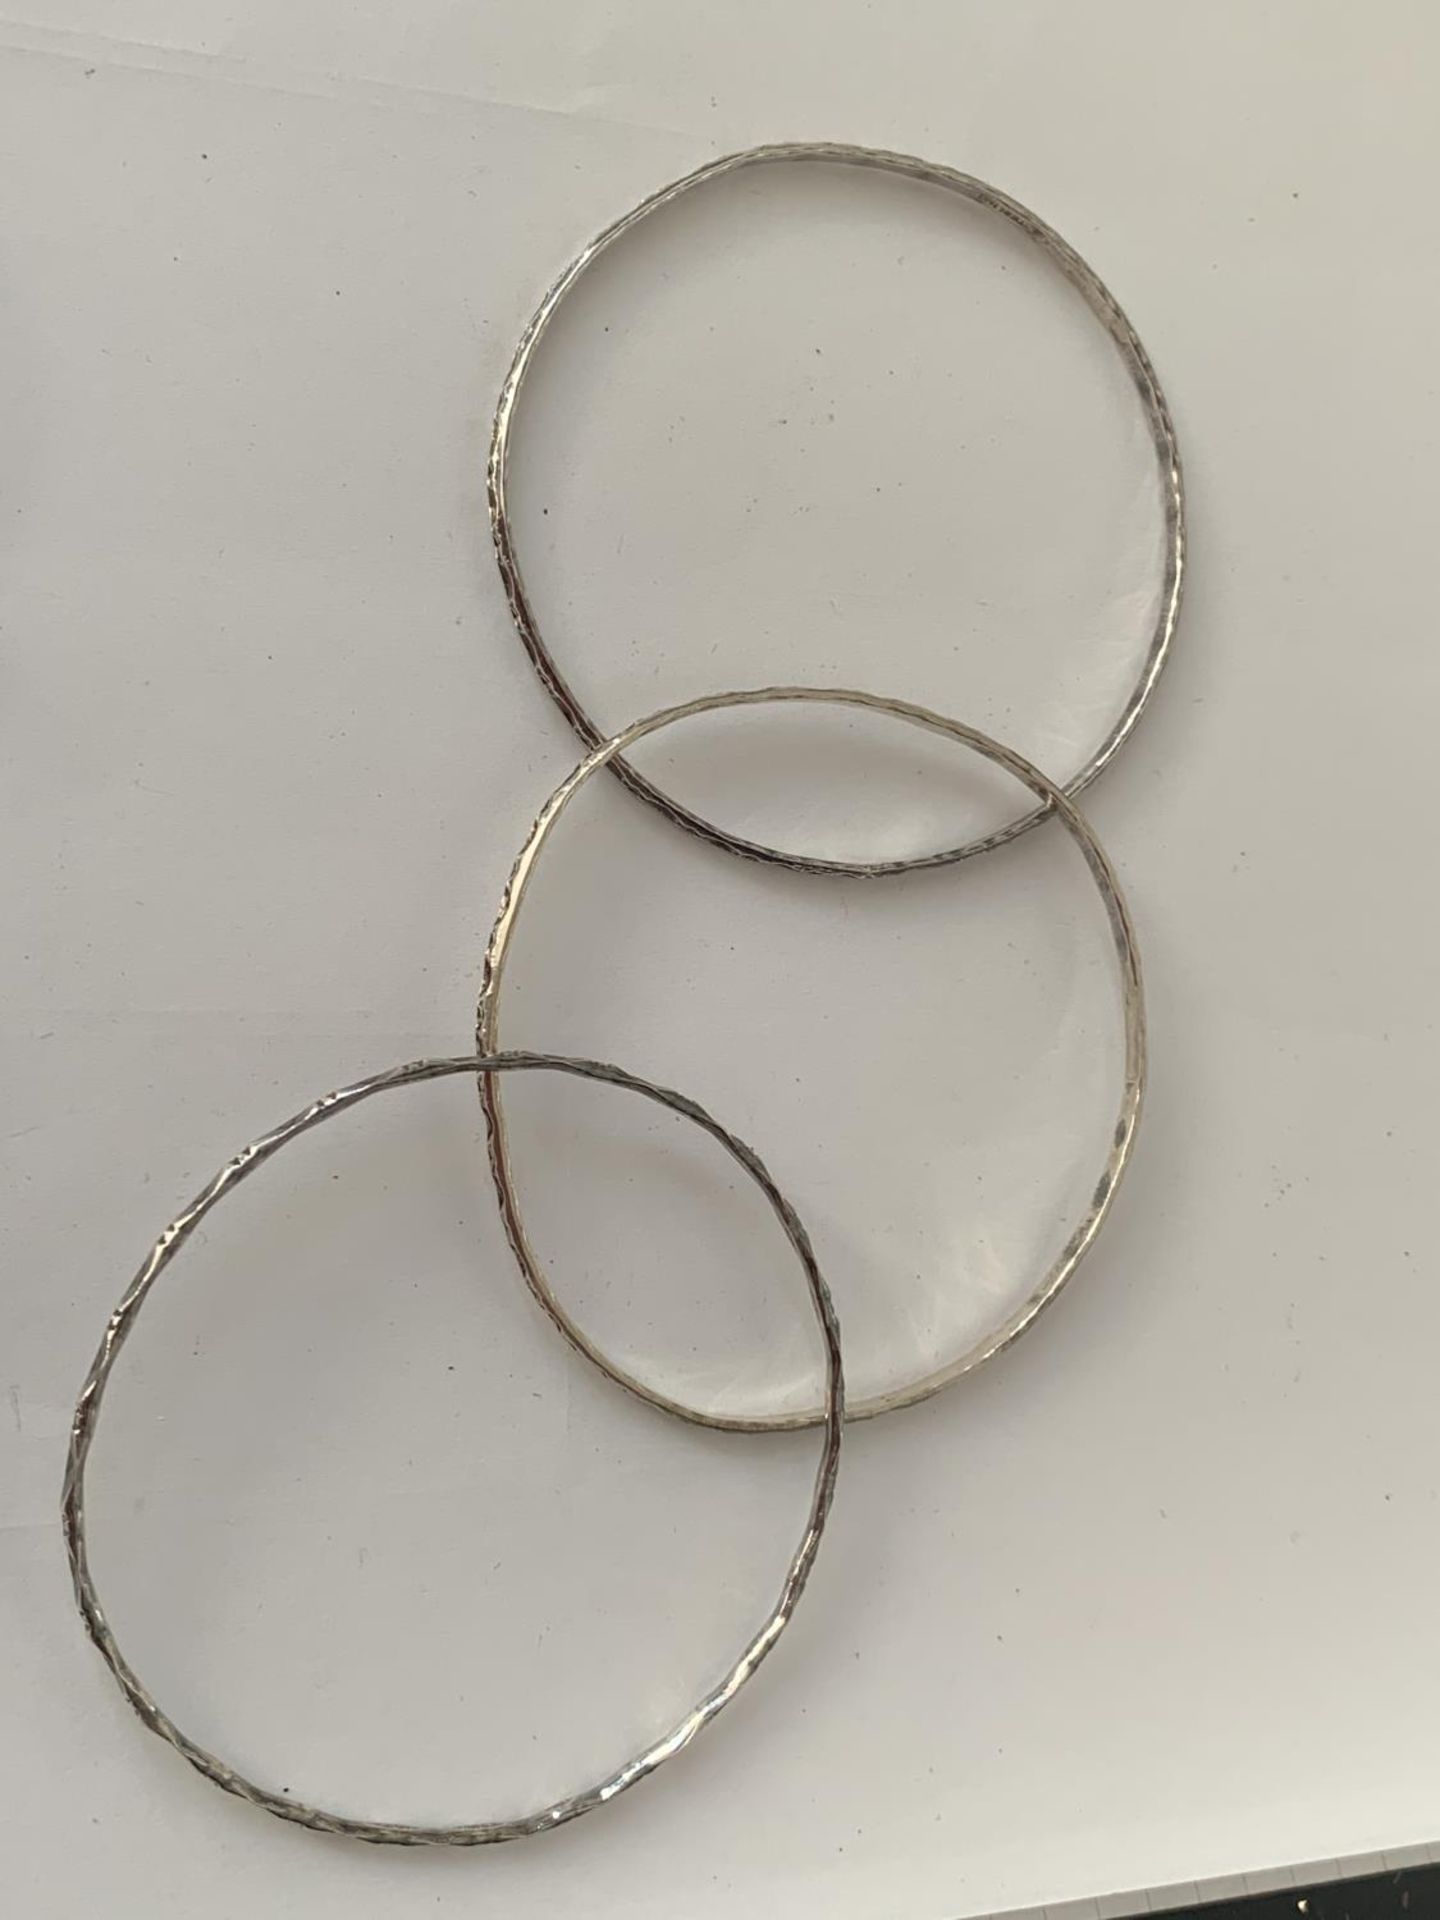 FIVE VARIOUS SILVER BANGLES TO INCLUDE A PANDORA AND A CHAMILIA - Image 3 of 4